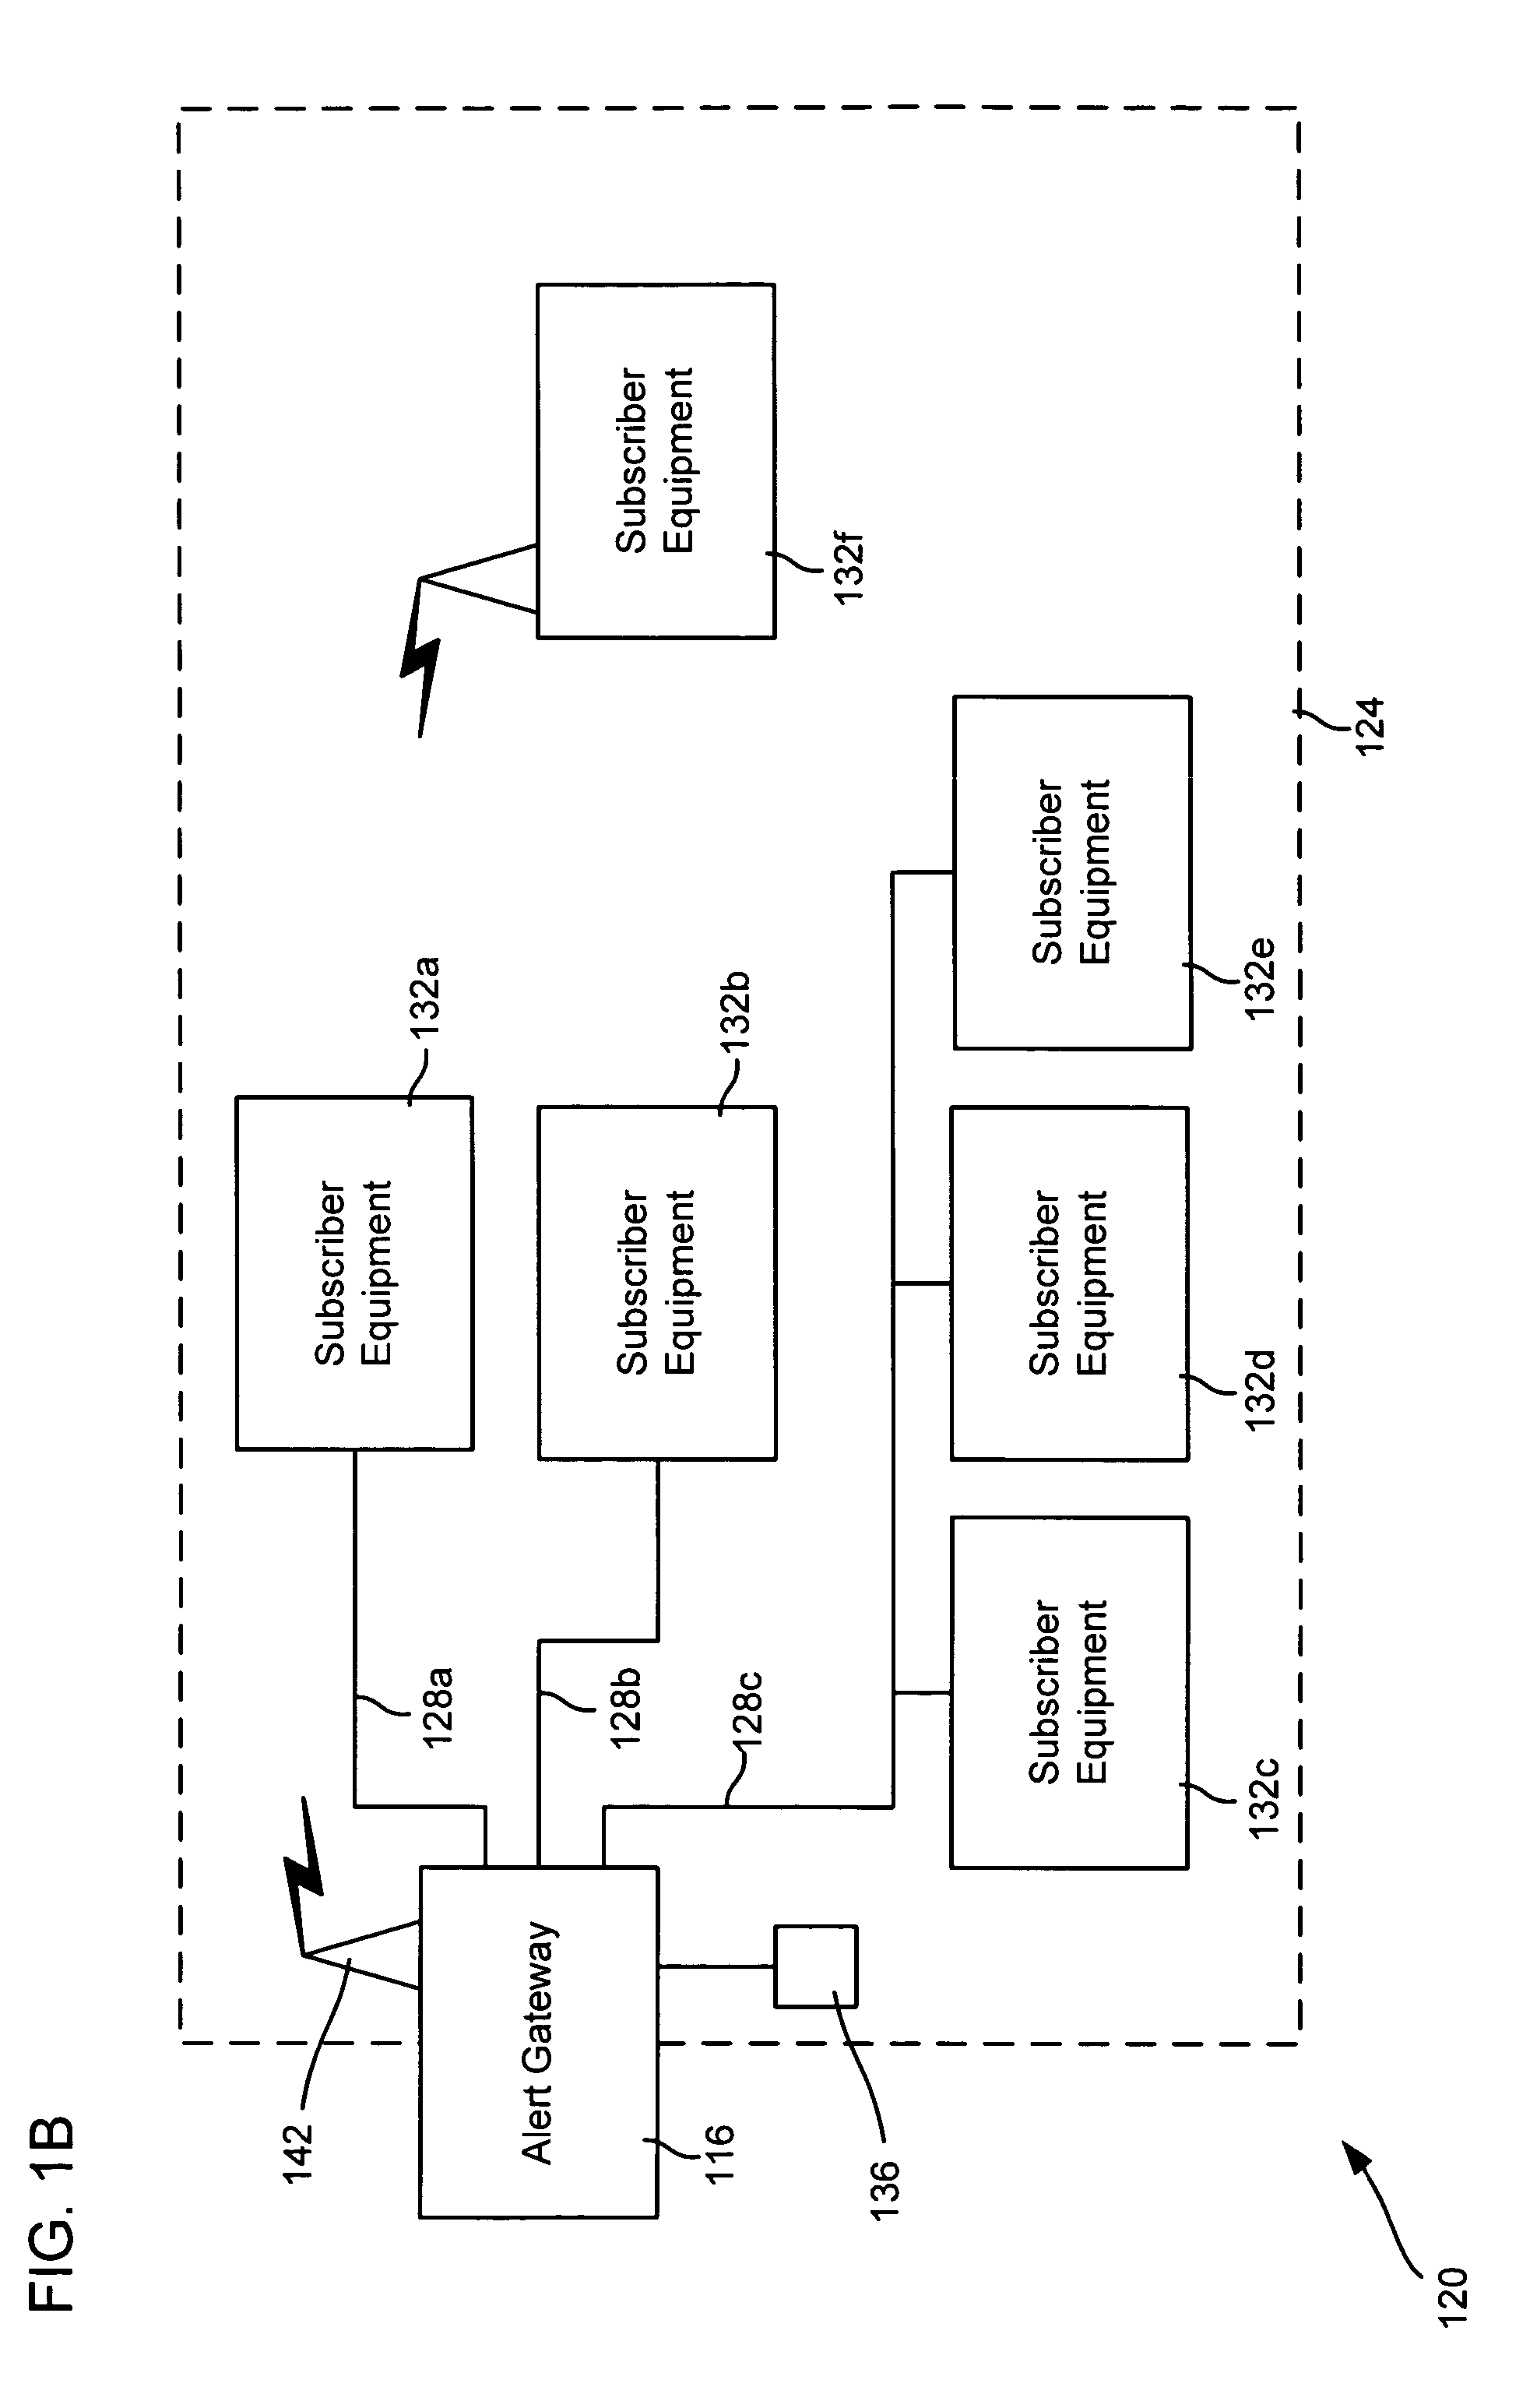 Methods, systems and apparatus for providing urgent public information